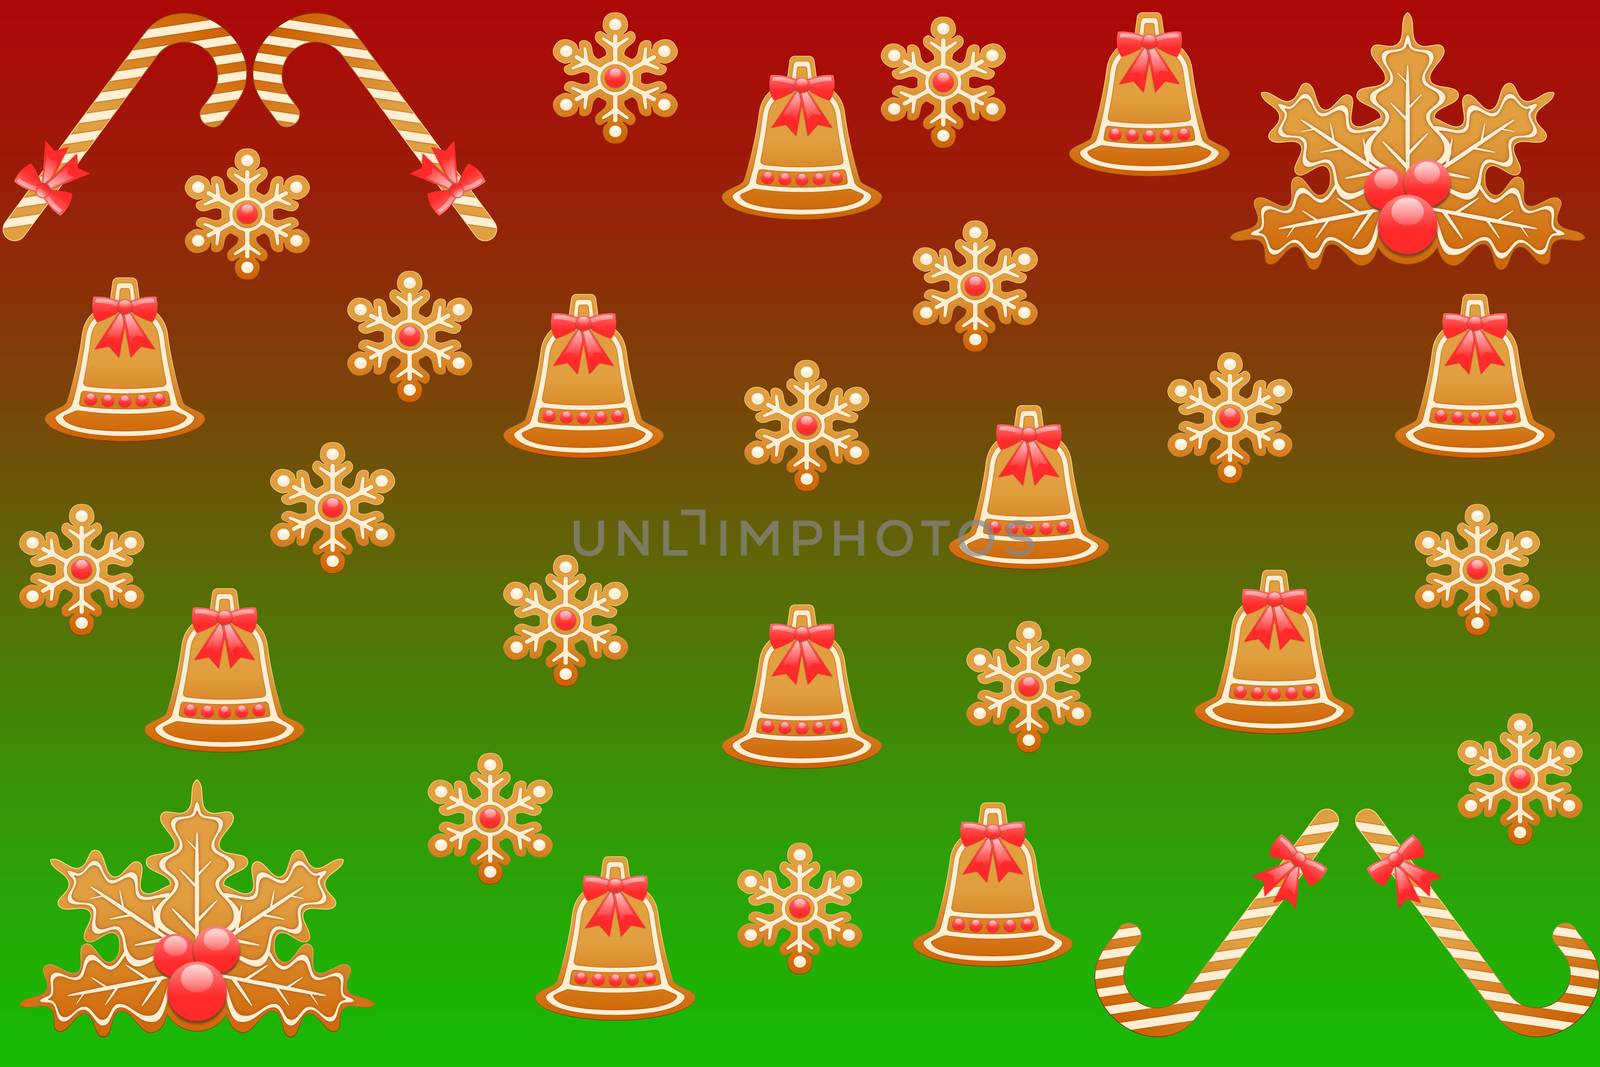 Merry christmas santa claus present wrapping paper gingerbread design pattern on a gradient green and red background